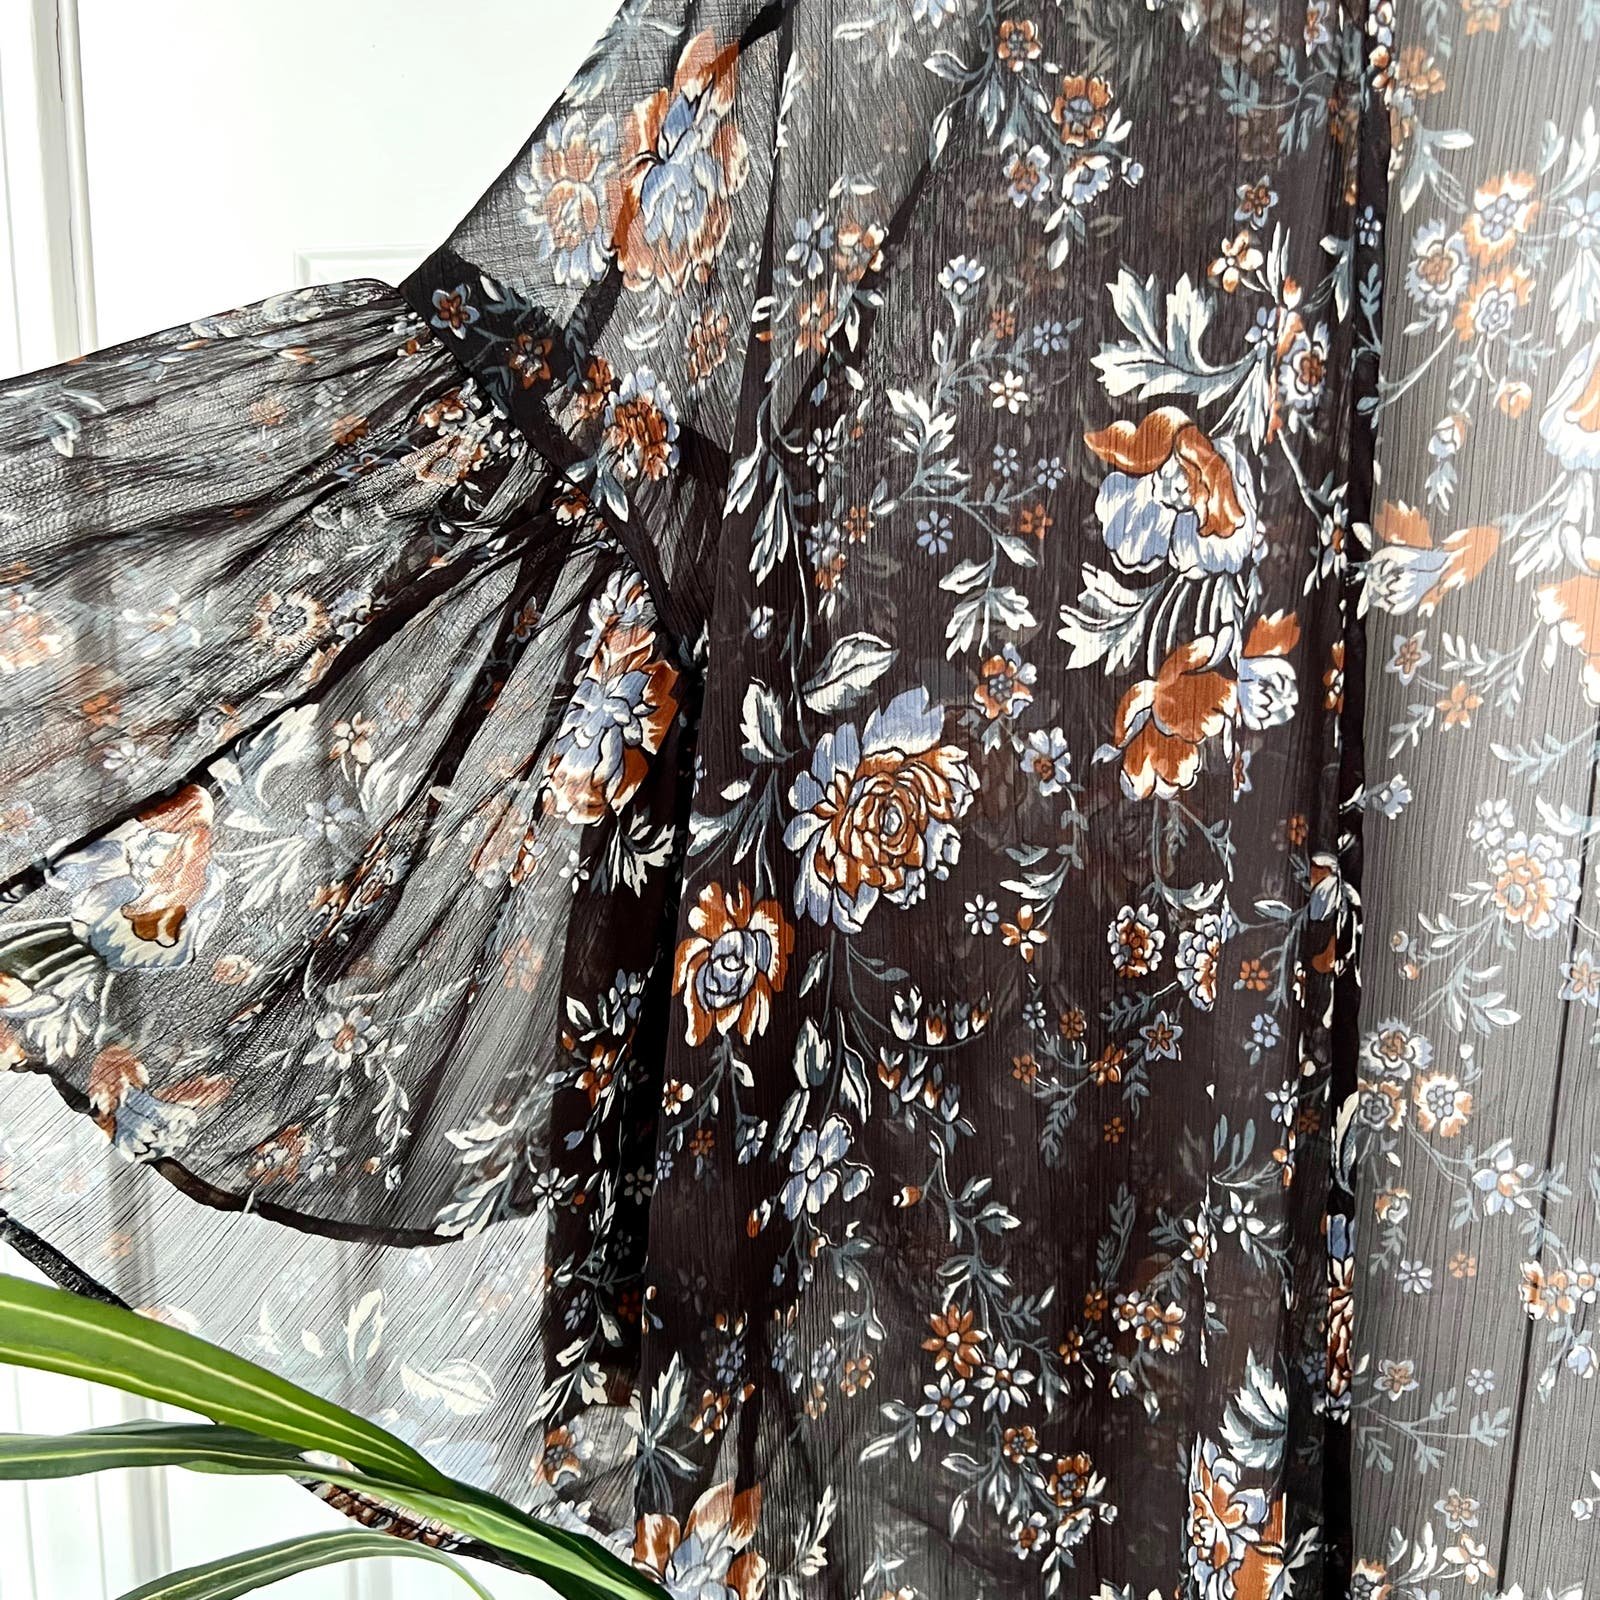 cheapest place to buy  American Eagle Floral Flutter Sleeve Kimono Sheer XS Small JwnpgSXGb Wholesale